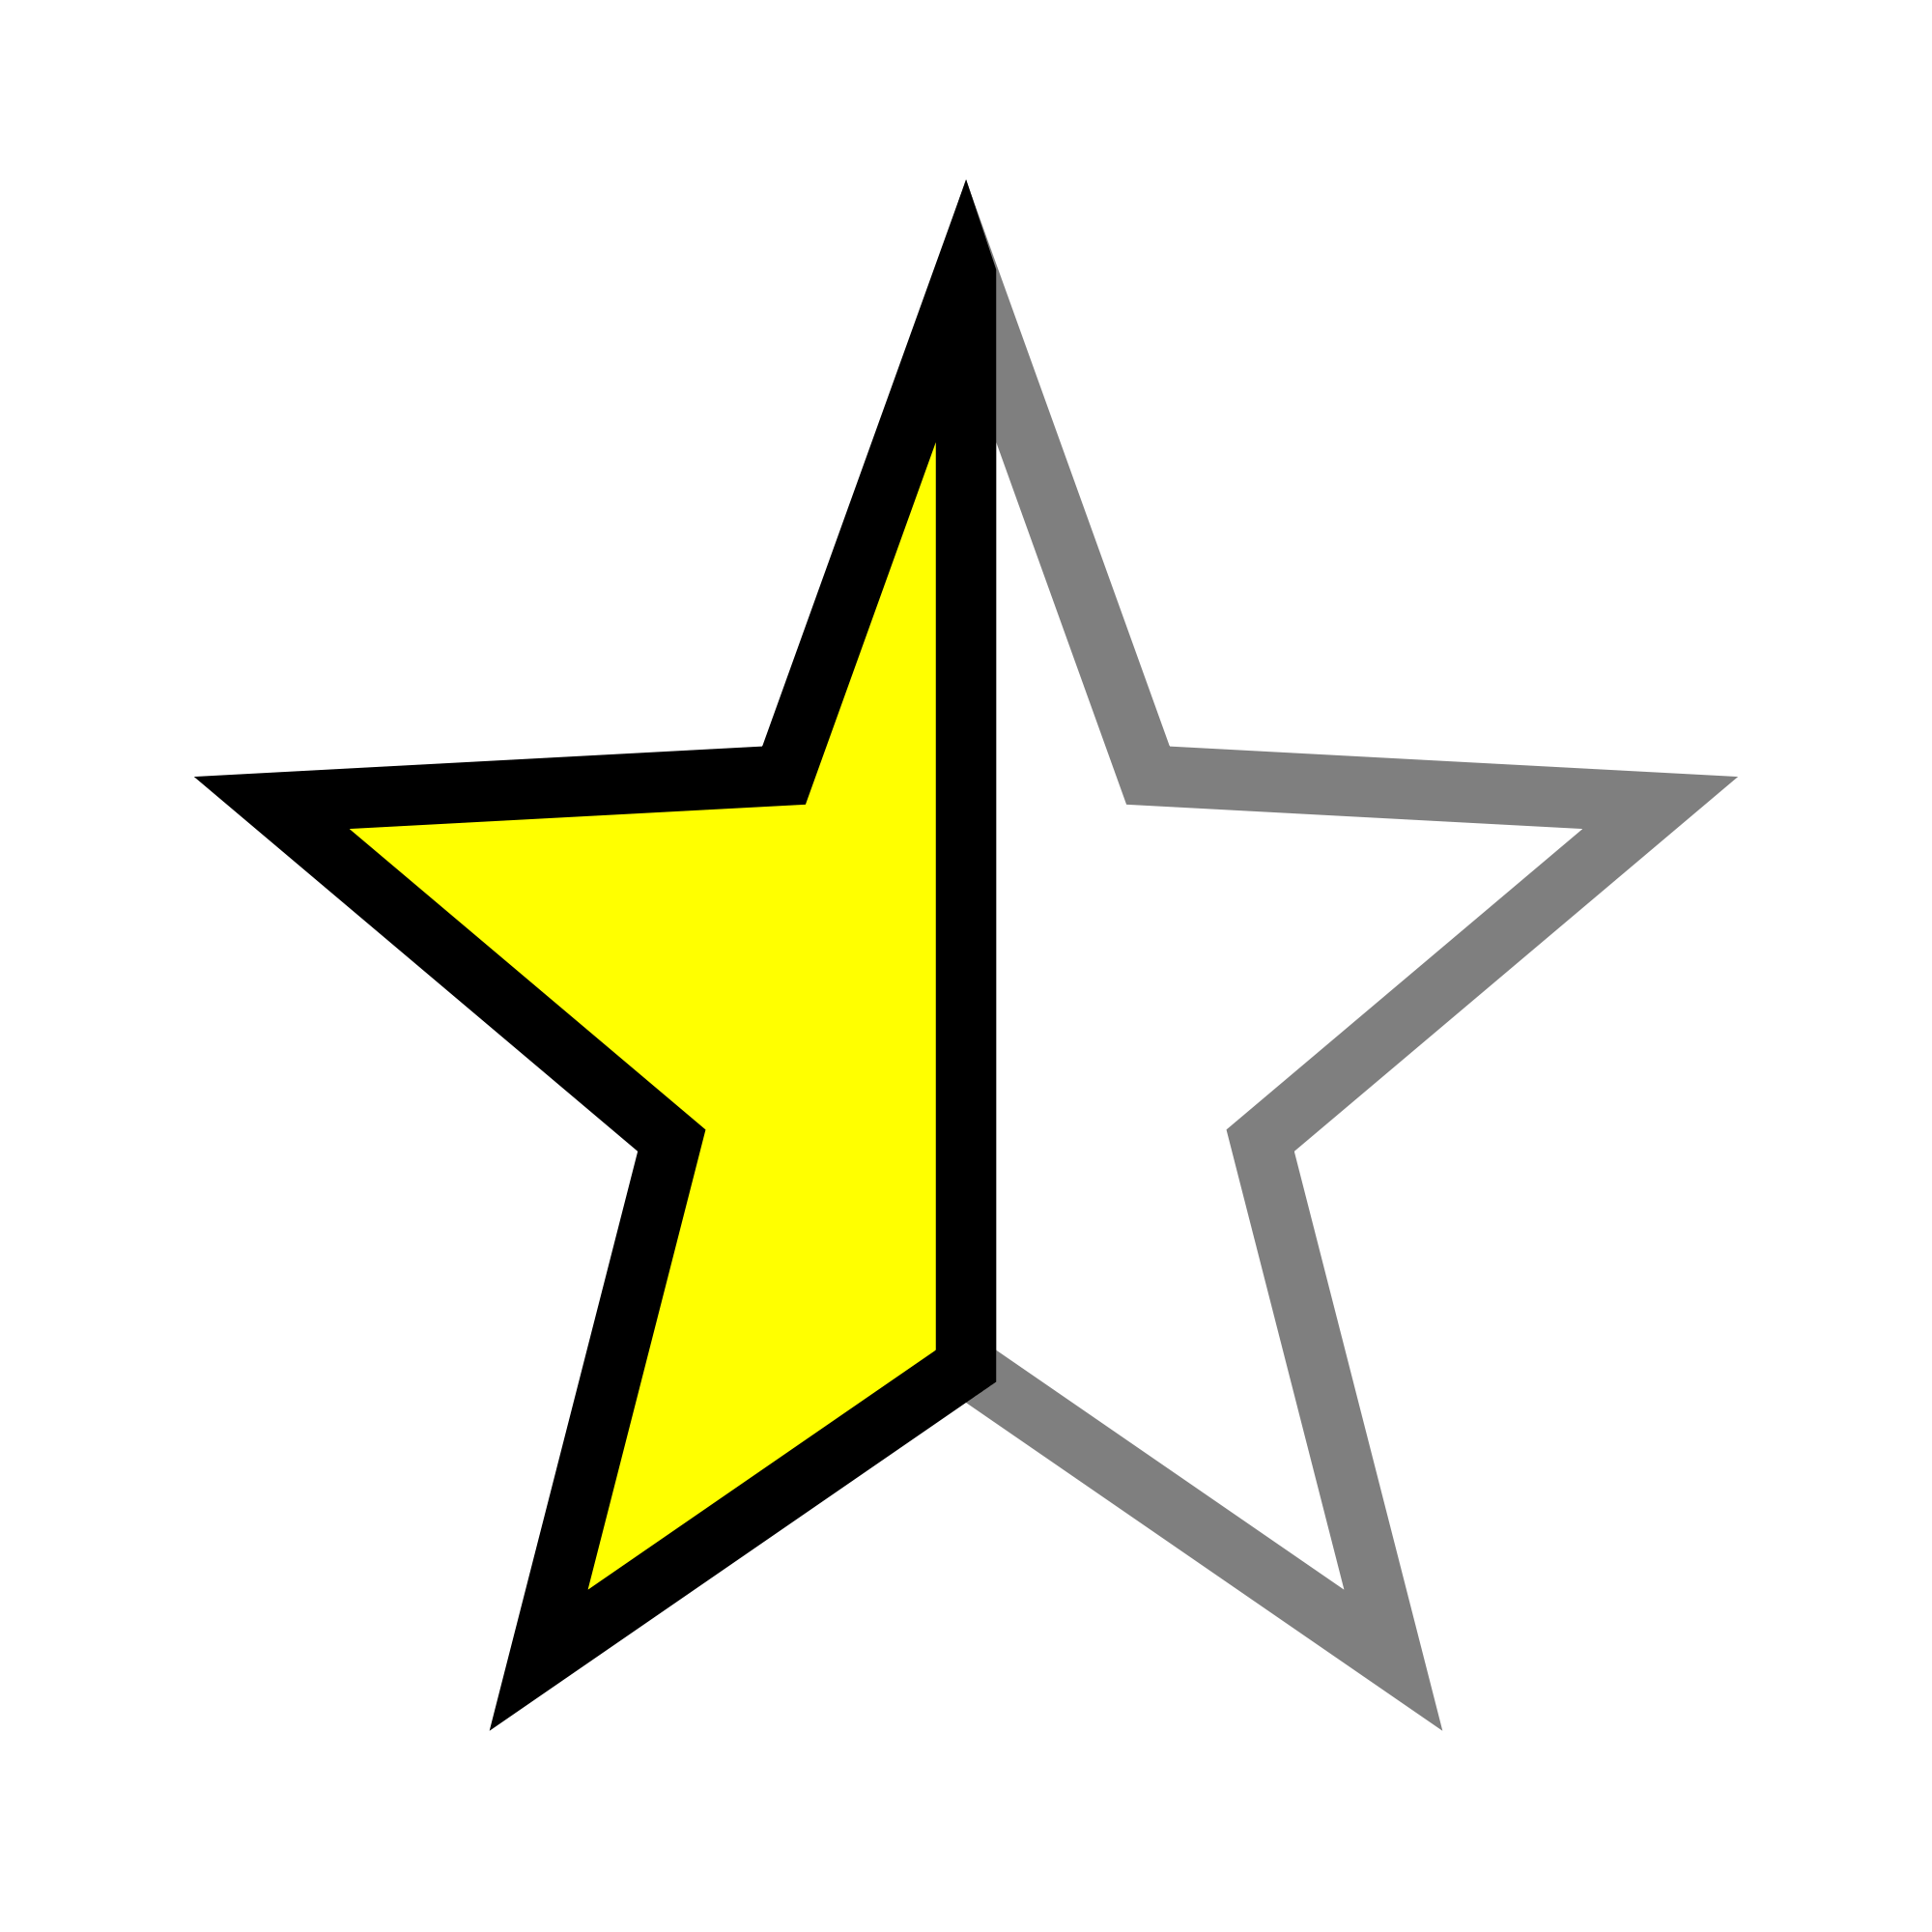 Blue and Yellow Star Logo - File:Half Star Yellow.svg - Wikimedia Commons